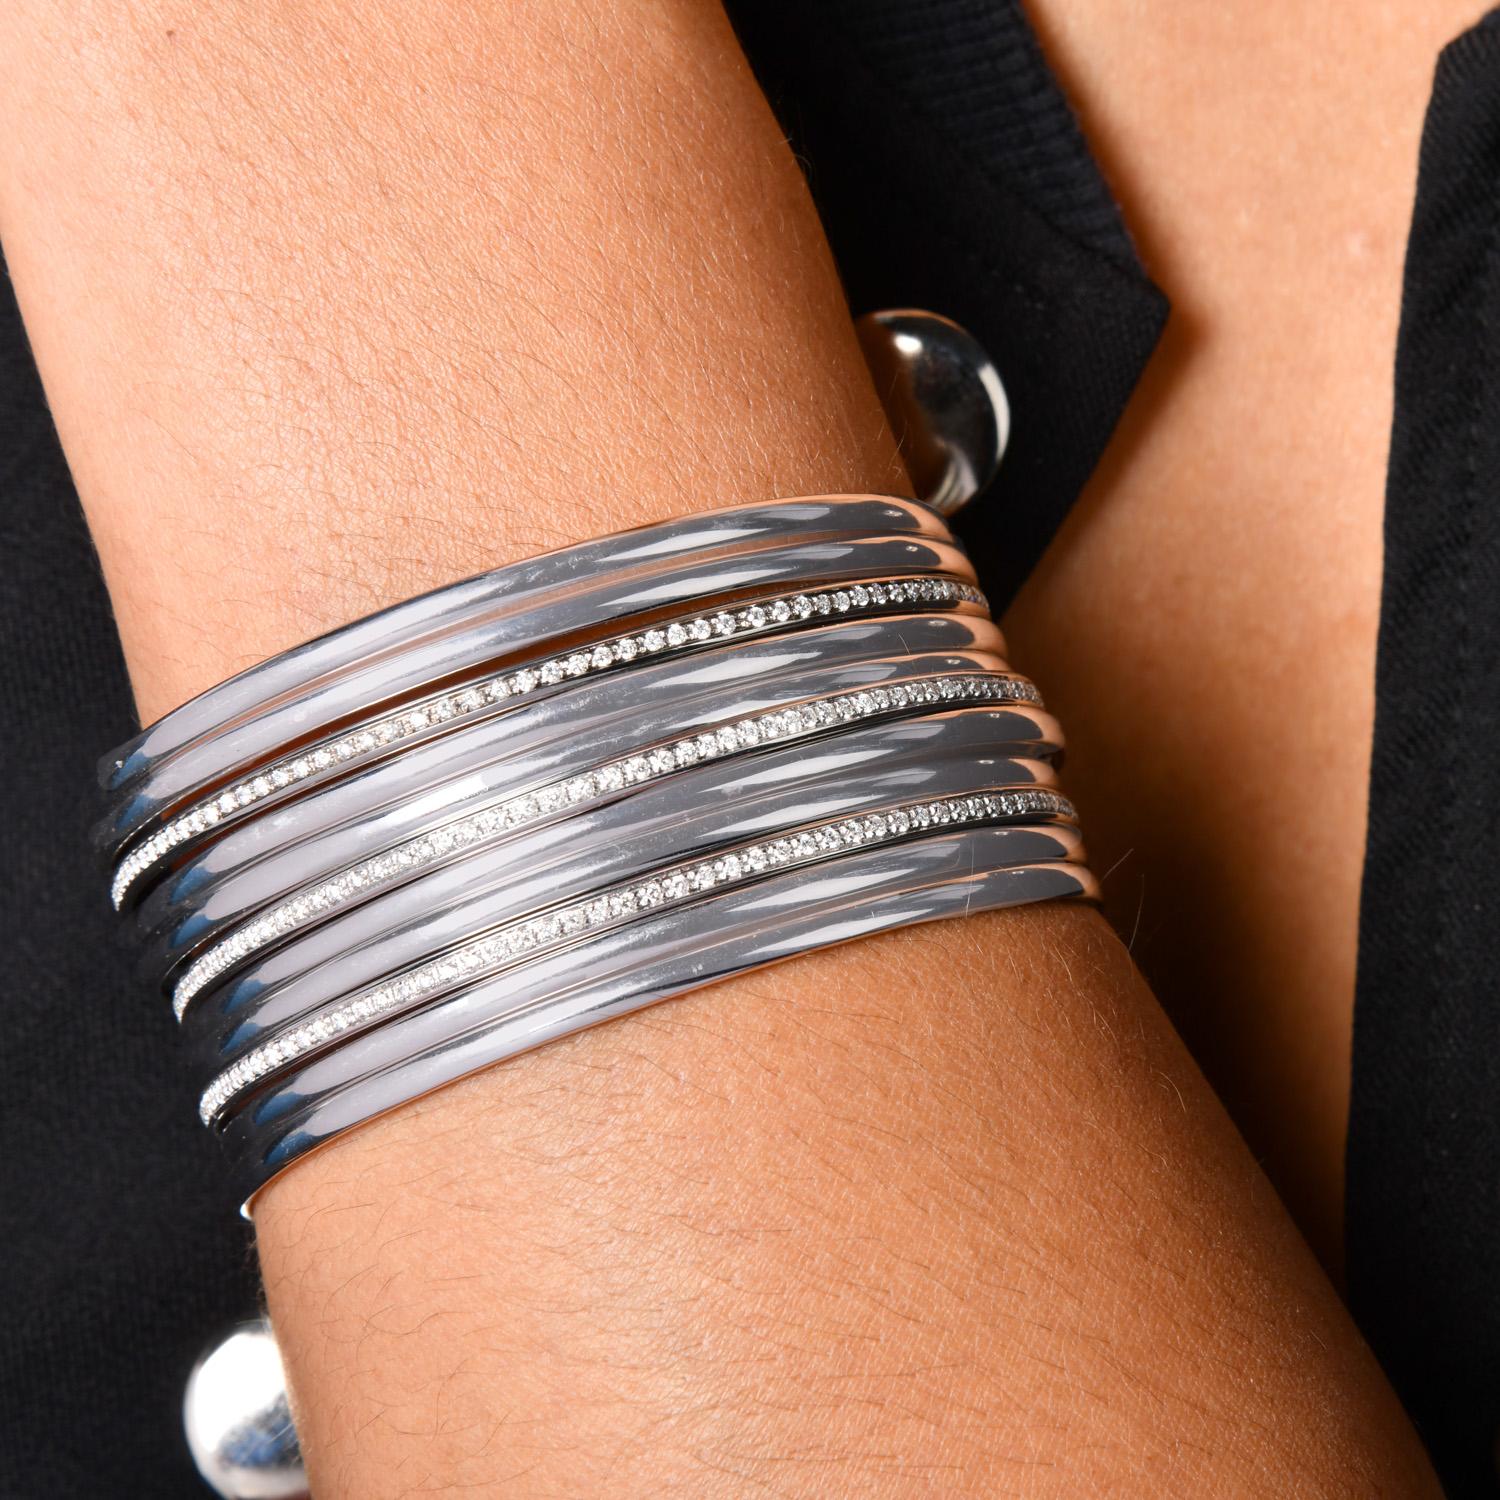 These fun bracelets are perfect for layering and stacking. They are Vintage Italian Retro 1980s stackable bangle bracelets crafted in solid 18-karat White gold and measure 6.75 inches around the wrist. They are composed of eleven gold bangles( 3